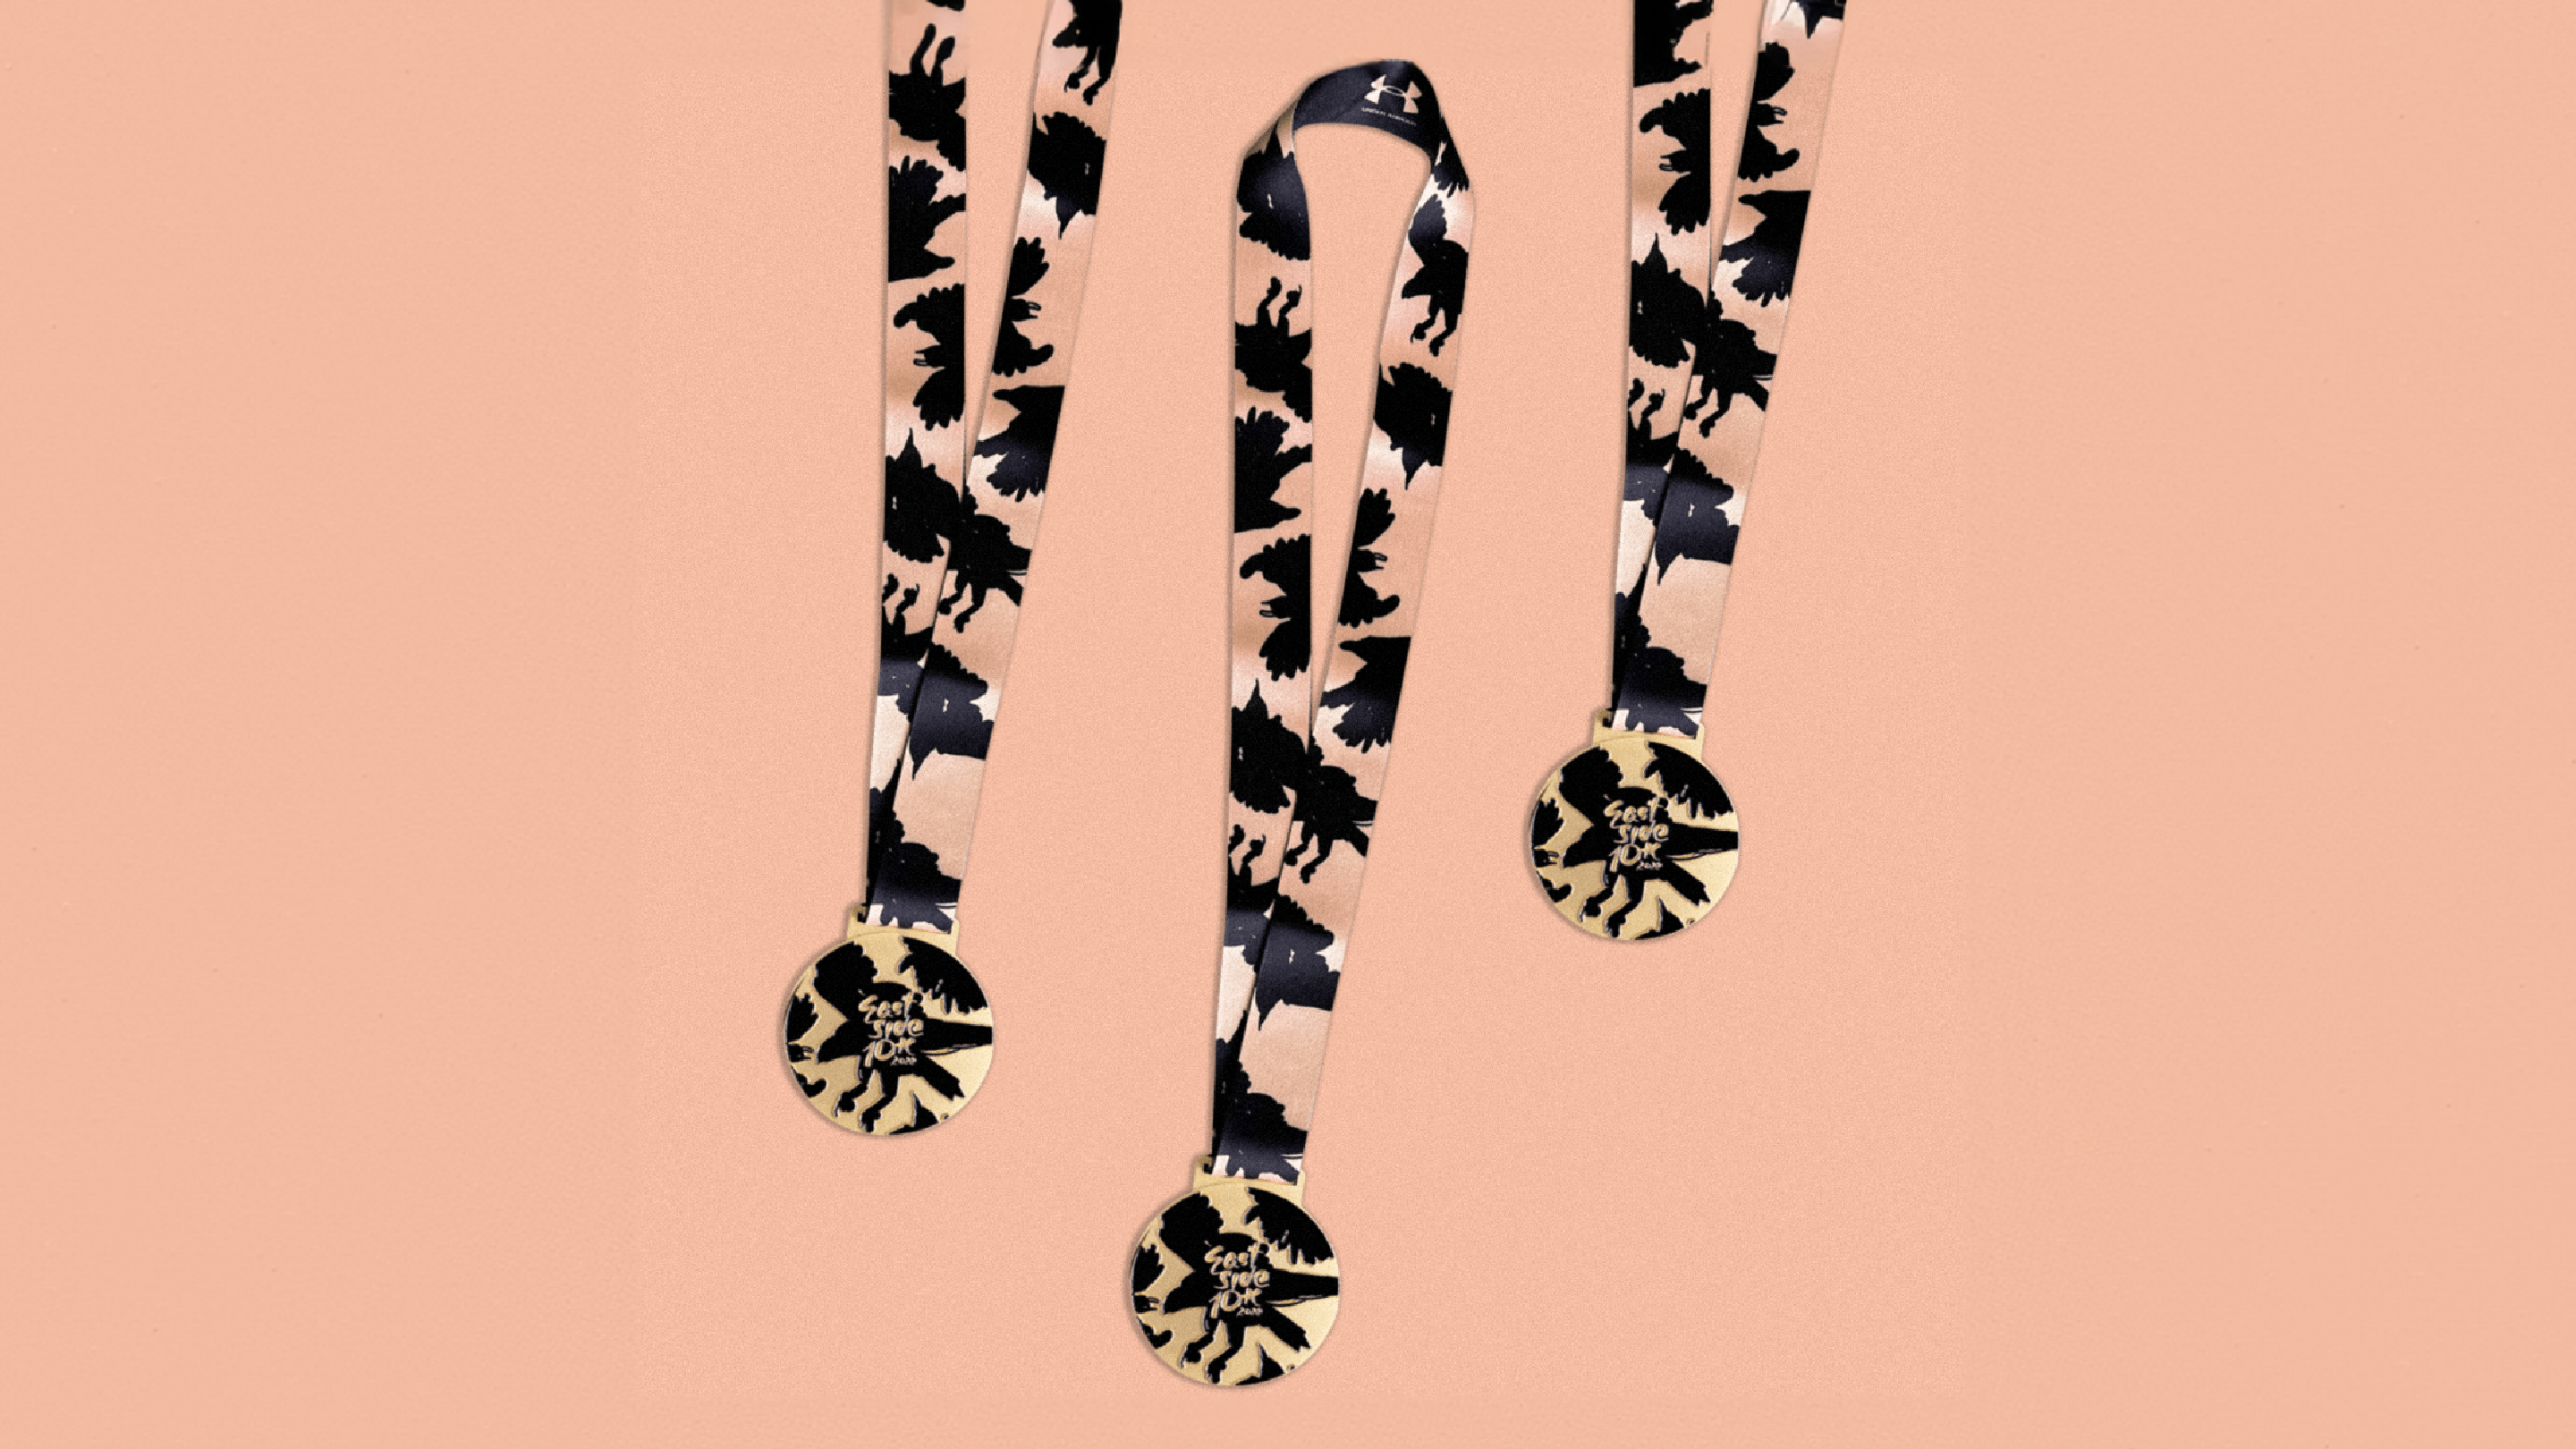 Medals with a crow pattern on the fabric and metal